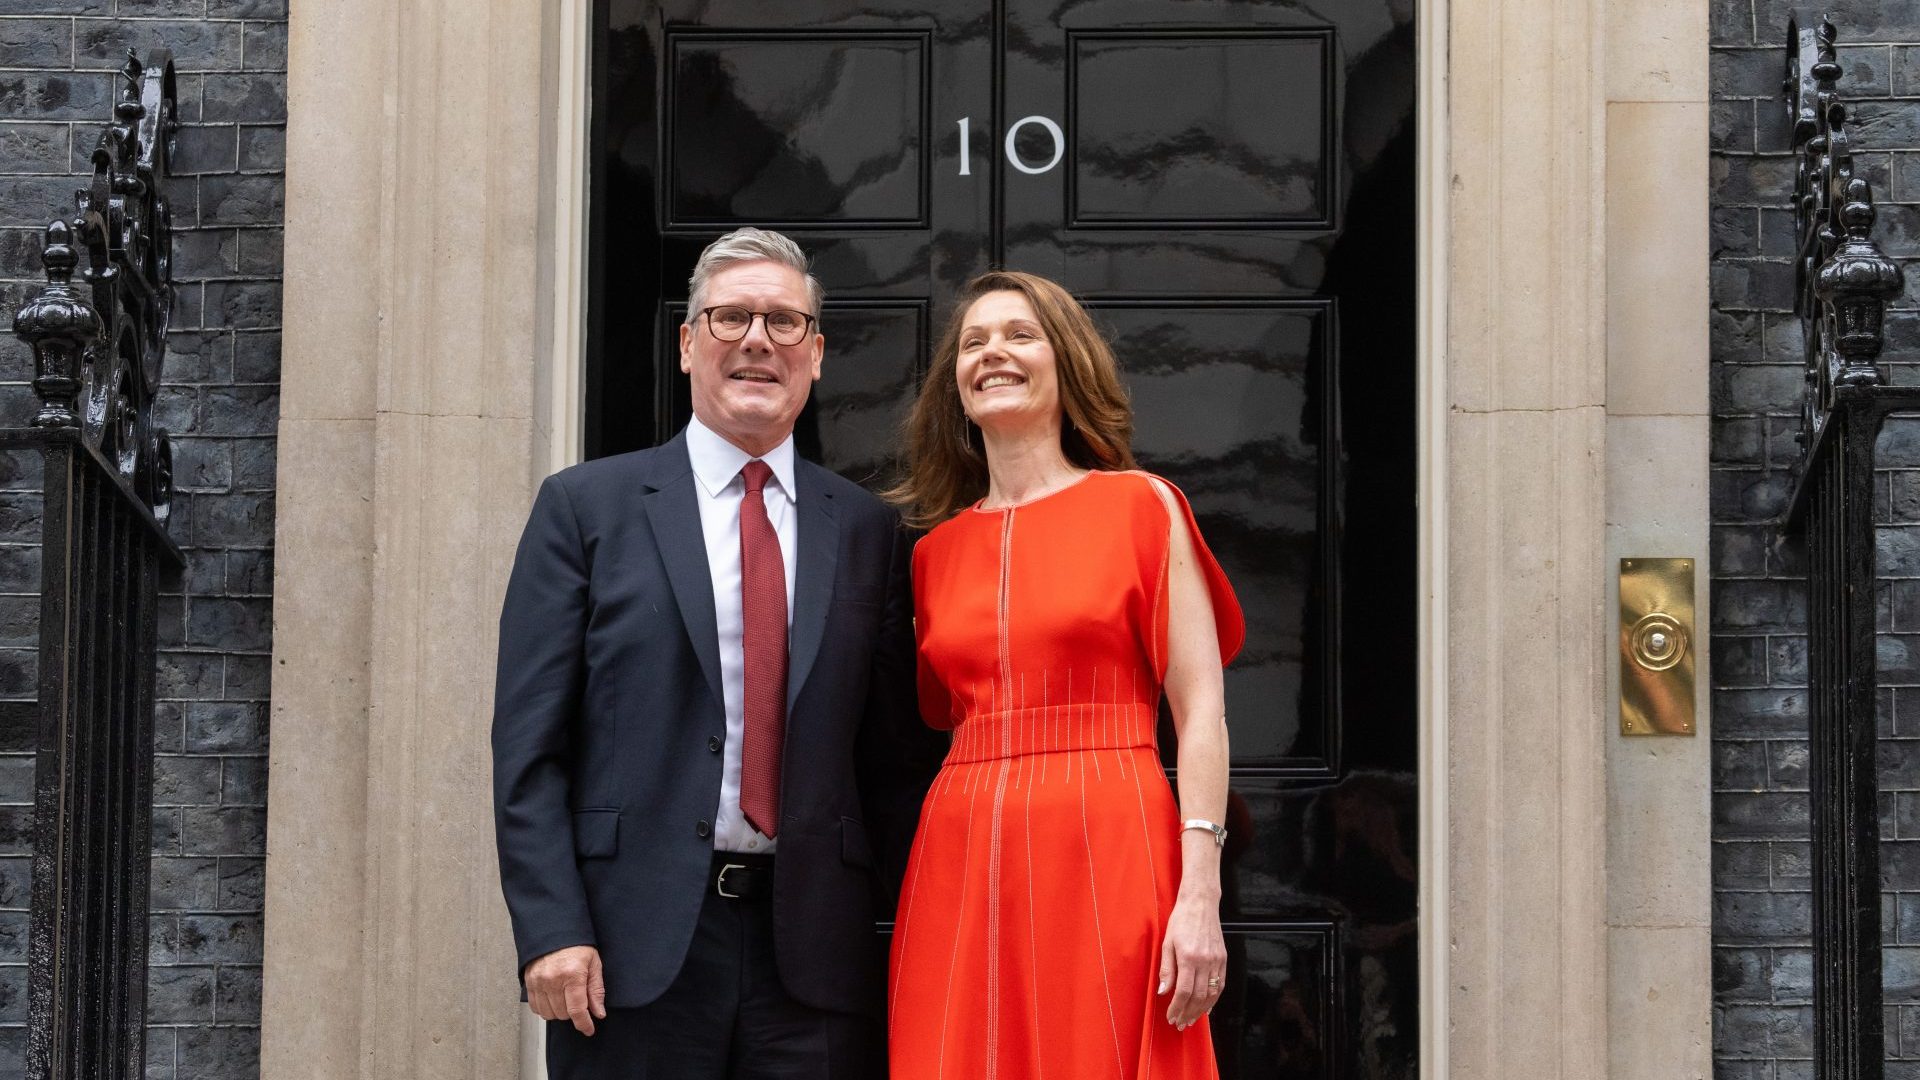 Keir Starmer and wife Victoria enter 10 Downing Street (Photo by Carl Court/Getty Images)